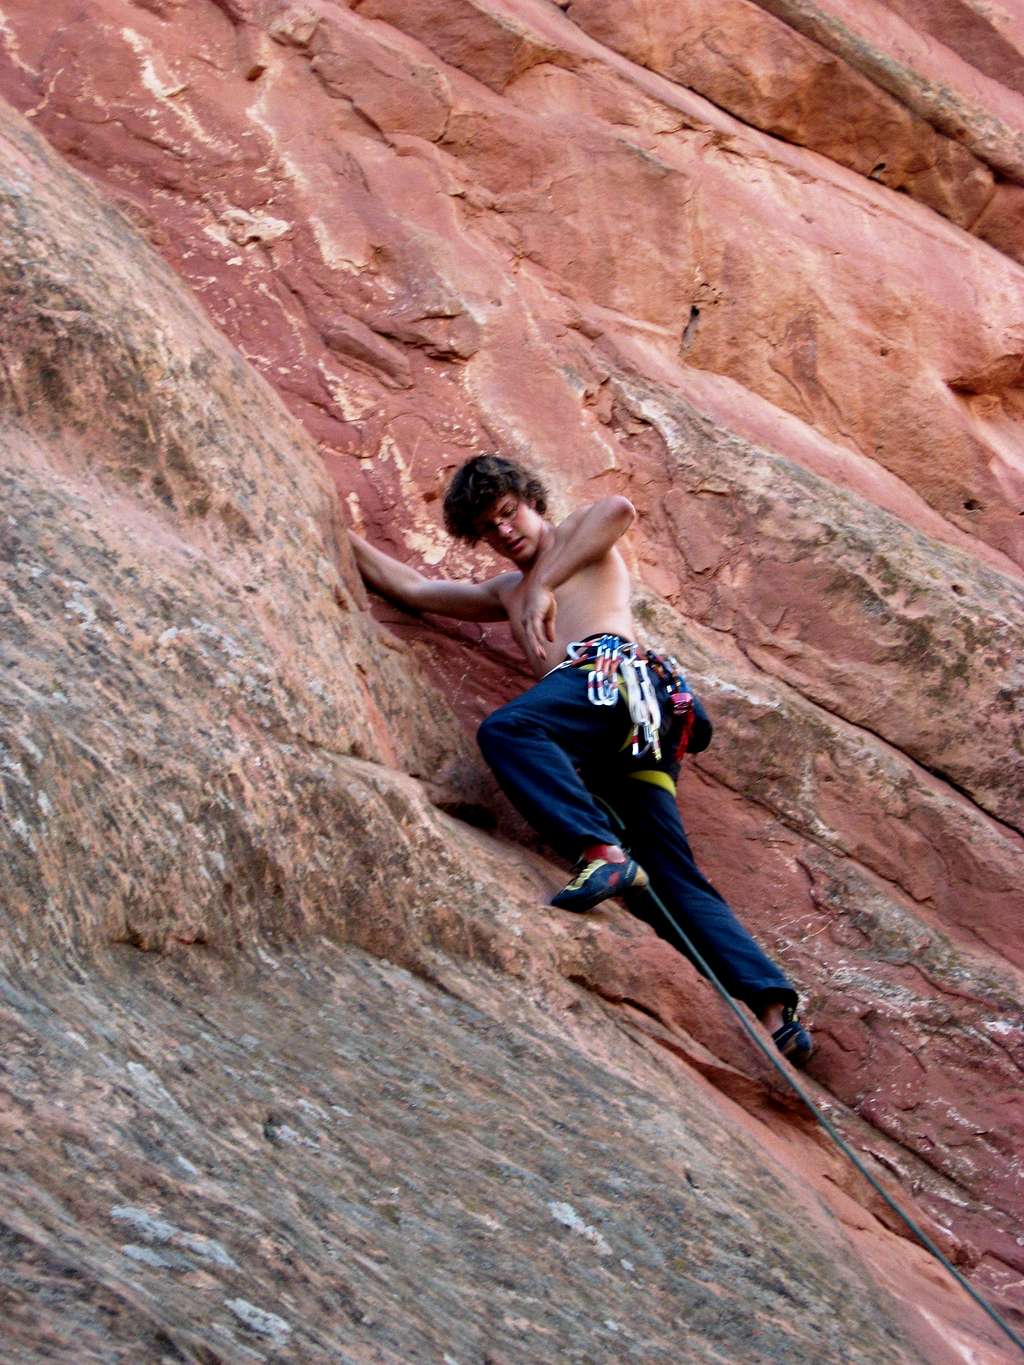 Clipping on 'Mighty Thor' (5.10b)